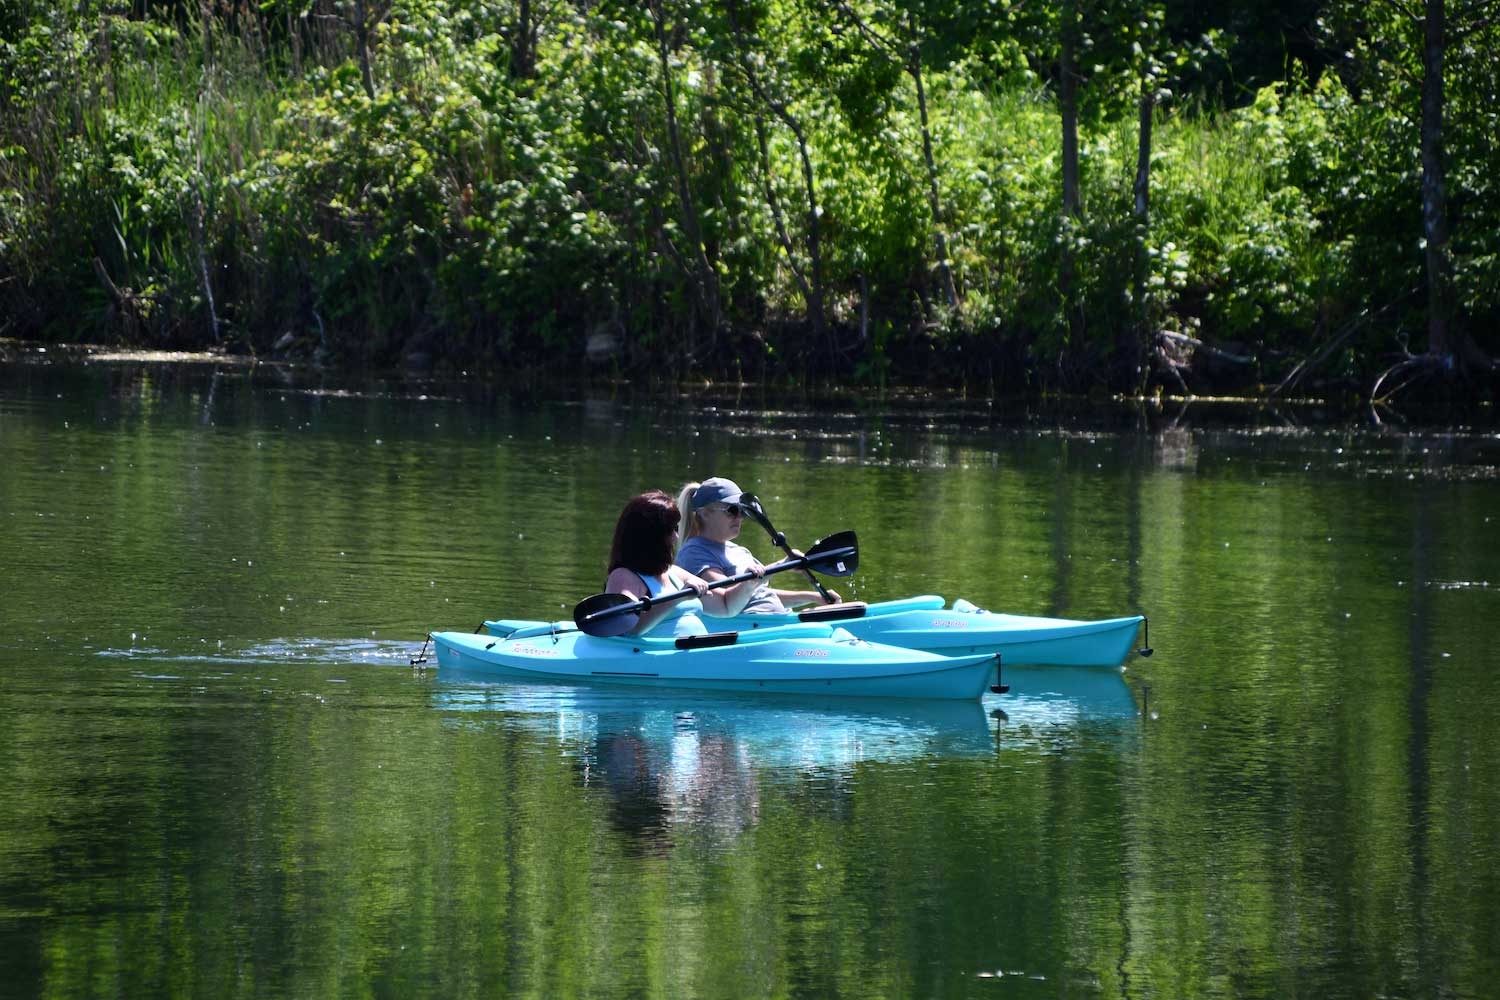 Two women paddling over the water in kayaks.